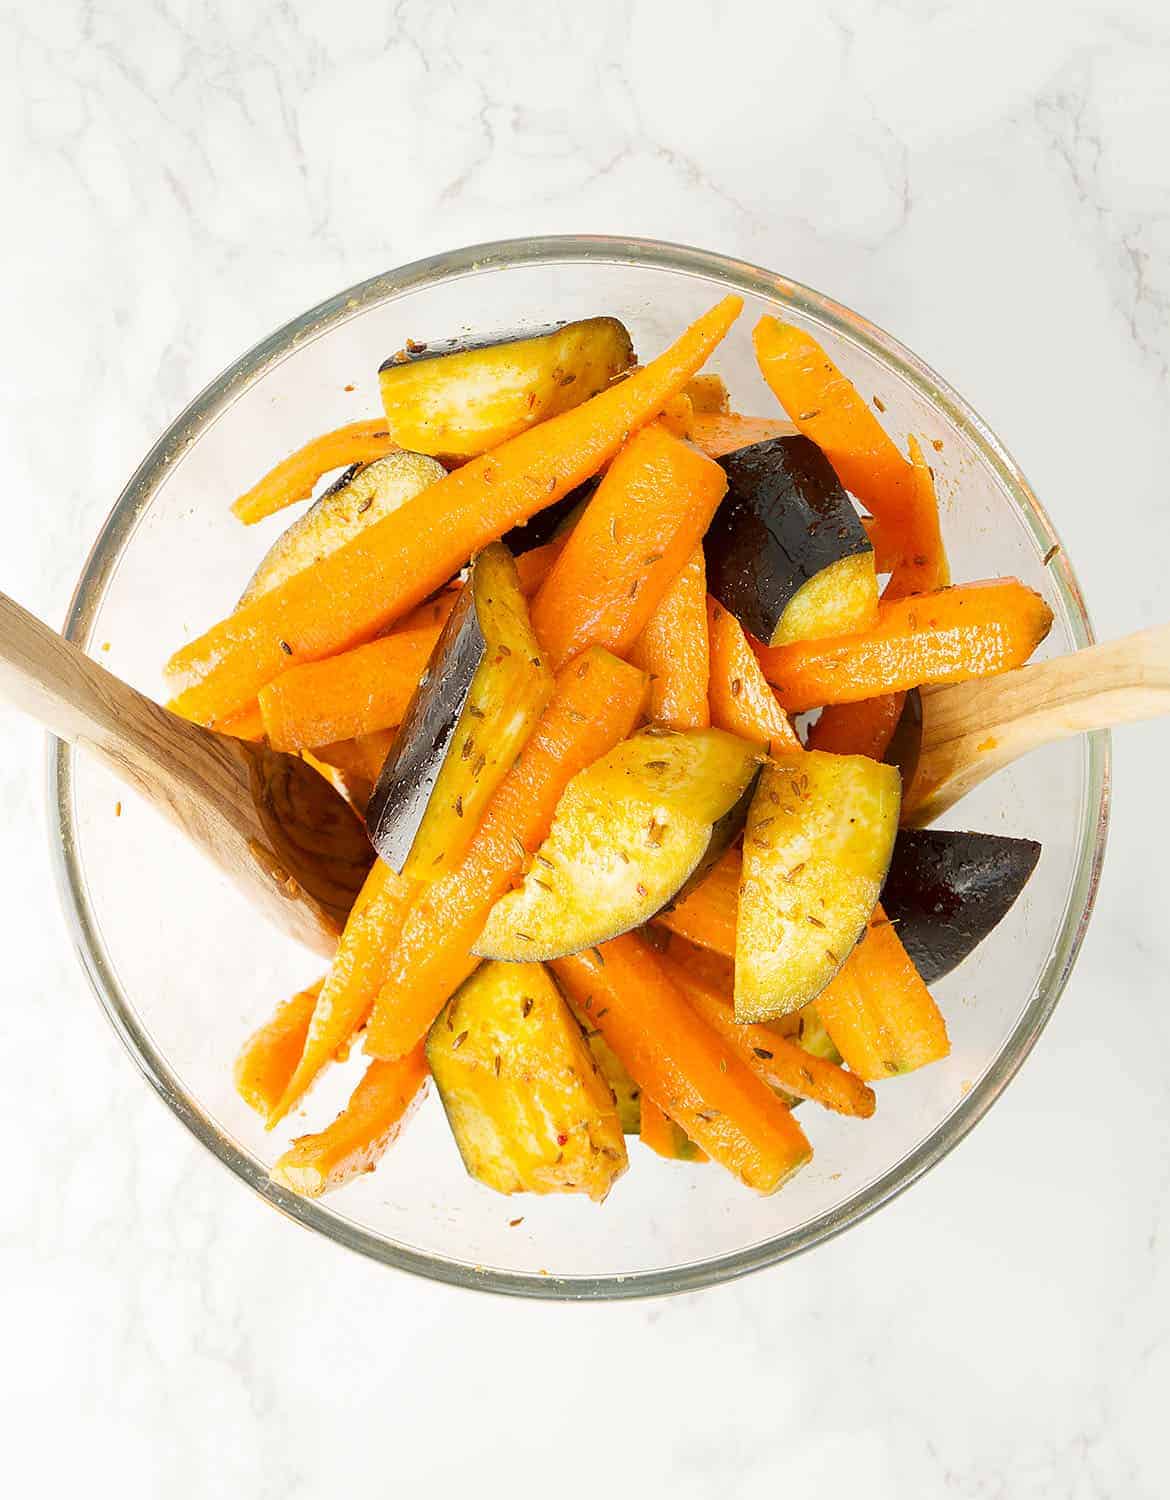 Carrot and eggplant mixed in a glass container.